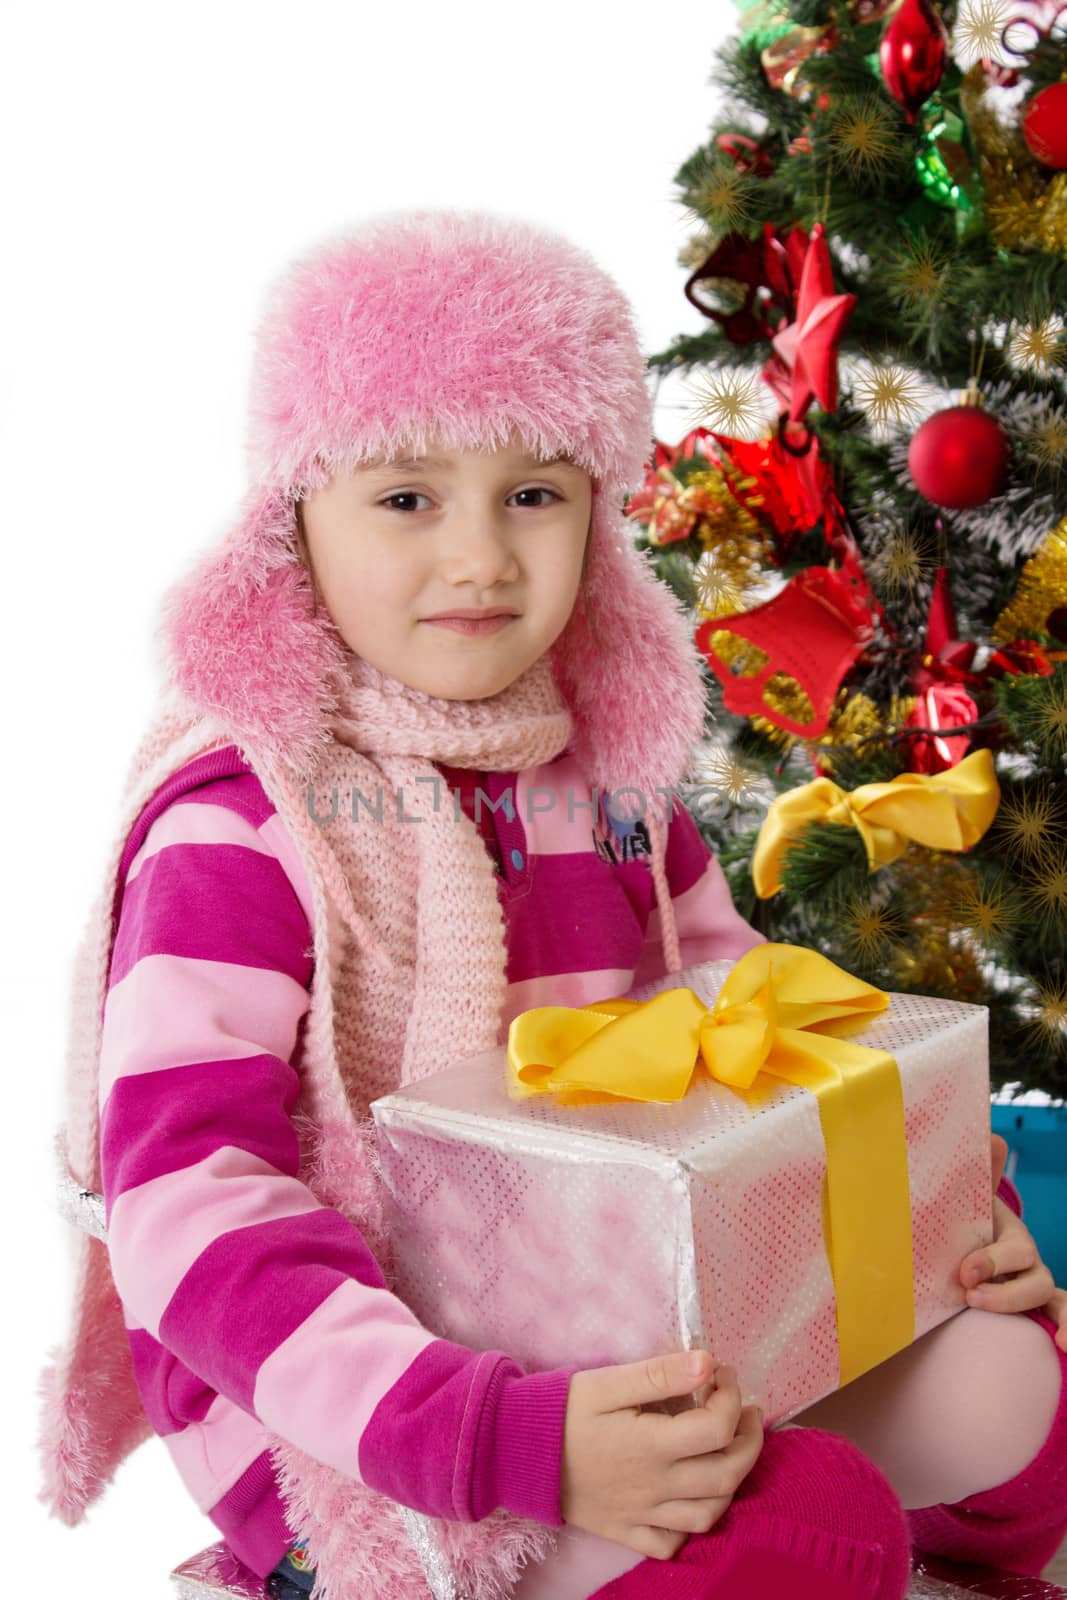 Girl in pink fur hat holding present under Chritmas tree by Angel_a